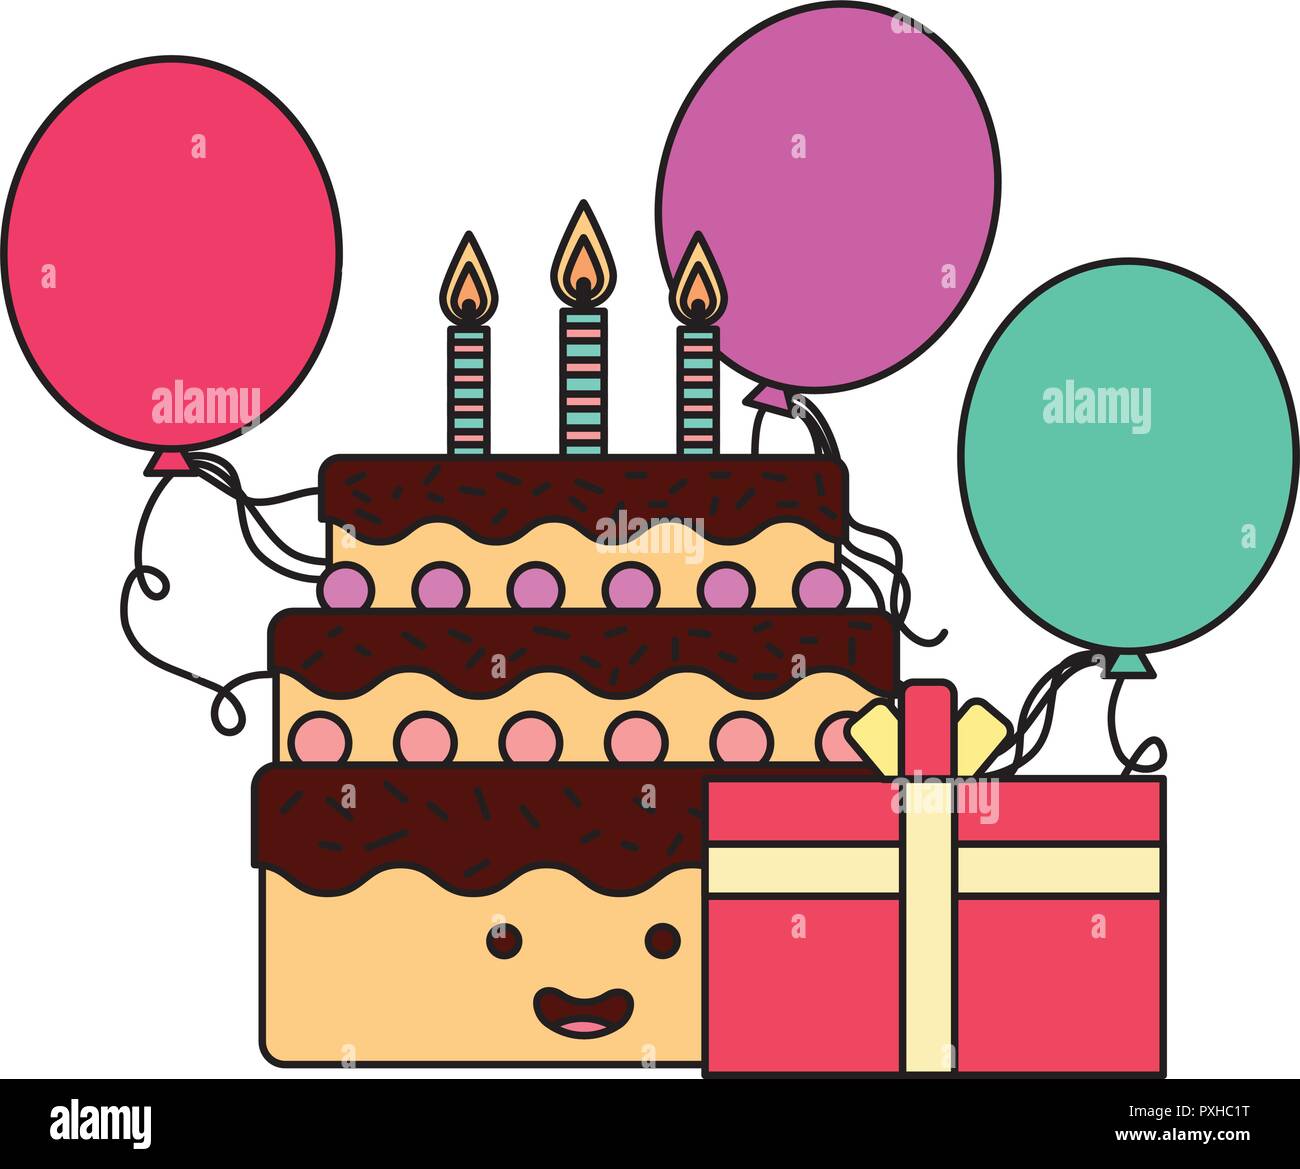 Illustration Layout Cake Happy Birthday High Resolution Stock Photography And Images Alamy